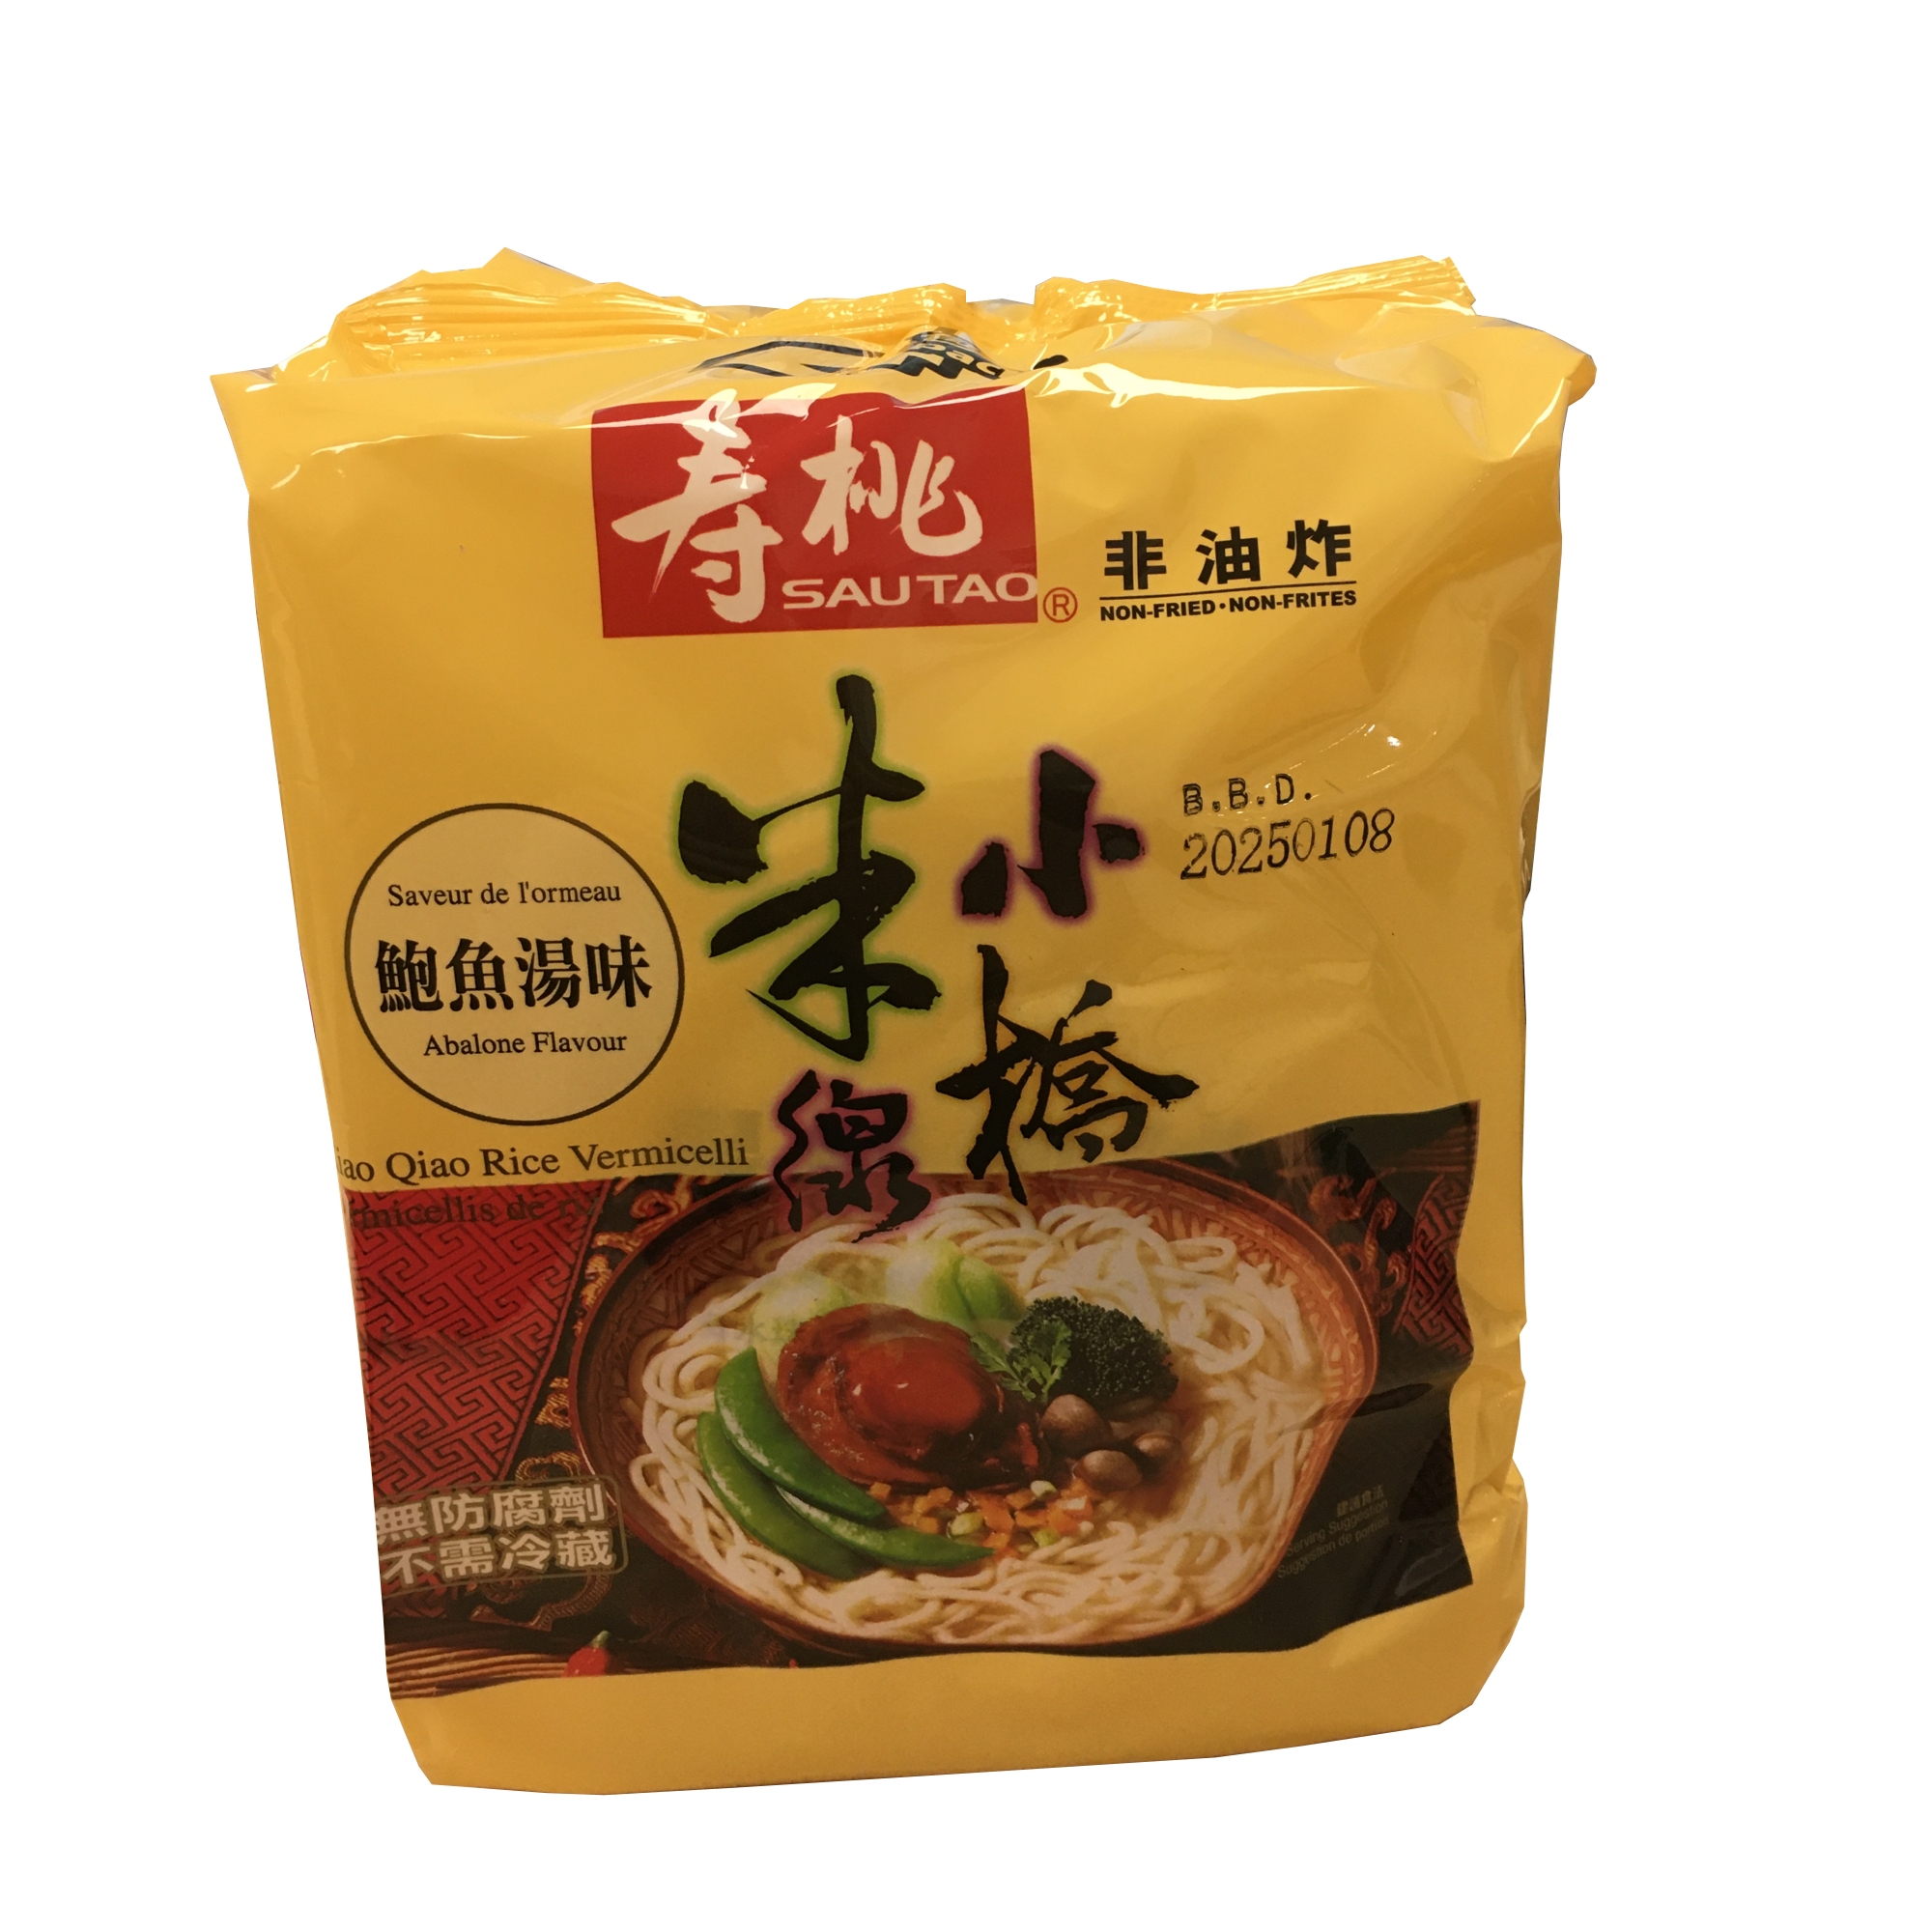 ST 4-PK XIAO QIAO RICE VERMICELLI ABALONE ND137061